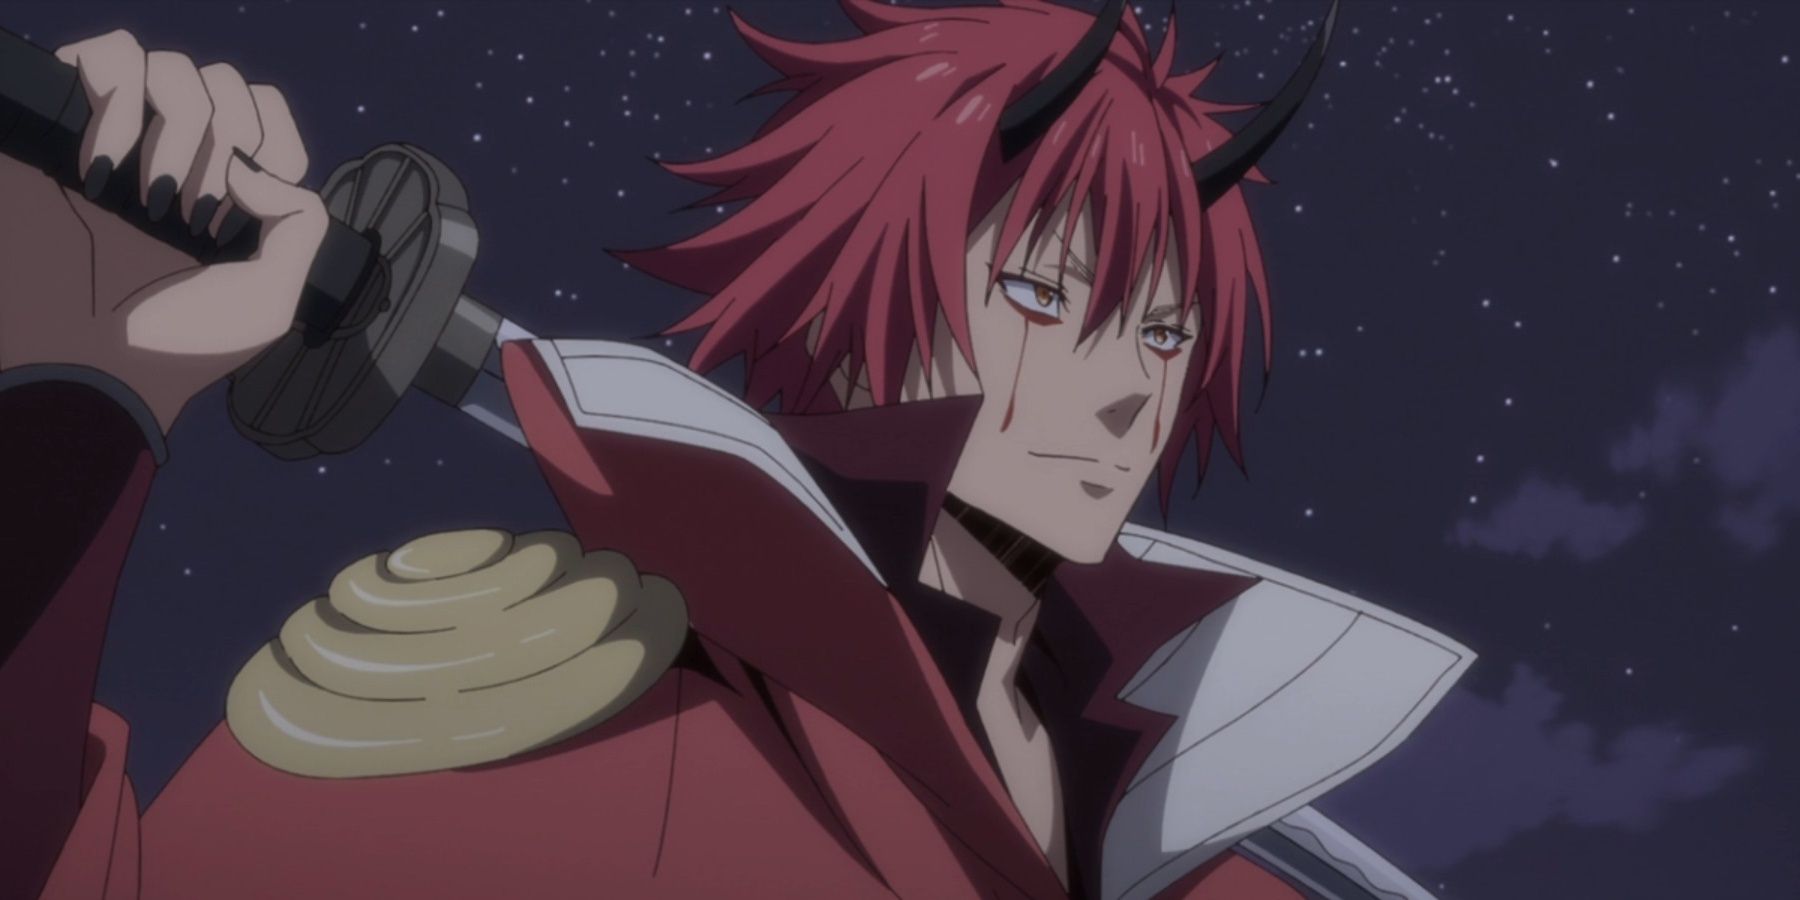 That Time I Got Reincarnated as a Slime: Strongest Tempest-Aligned Characters, Ranked